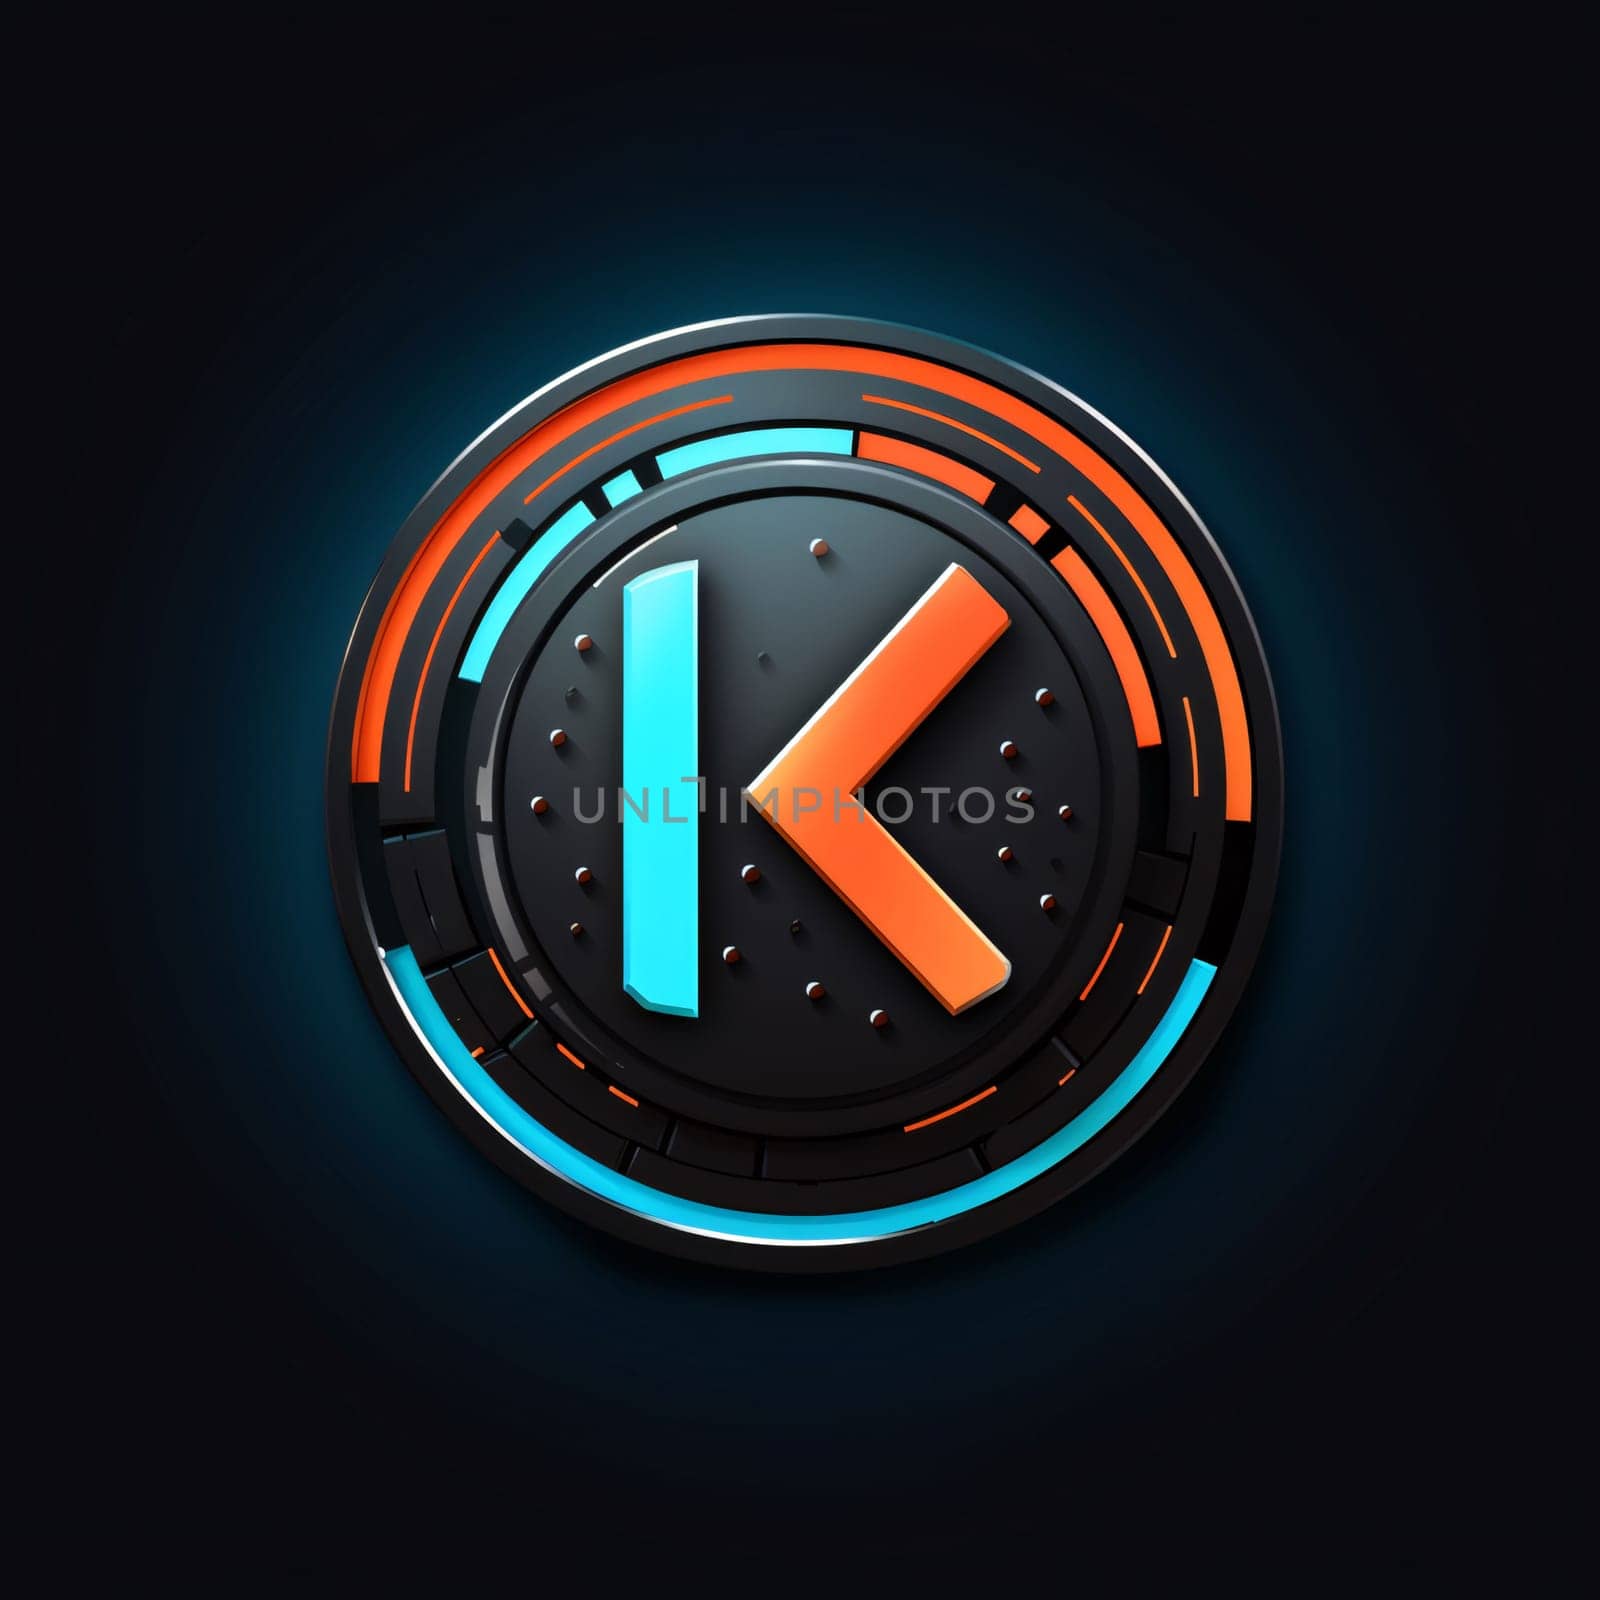 Graphic alphabet letters: Illustration of black and orange neon play button on dark background.